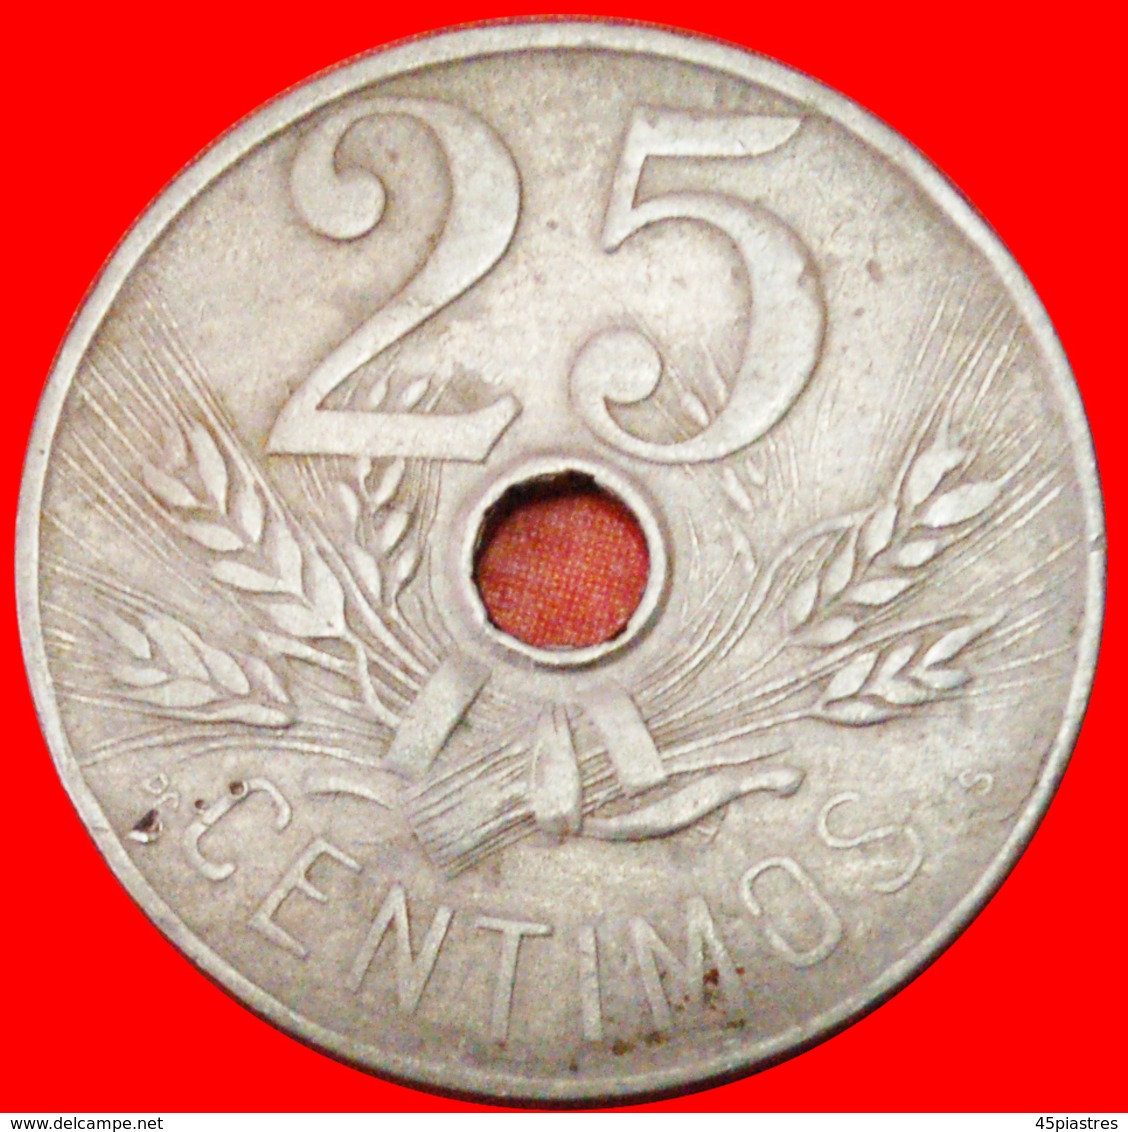 # HAMMER: SPAIN ★ 25 CENTIMOS 1927! LOW START ★ NO RESERVE! Alfonso XIII (1886-1931) - Proeven & Herslag